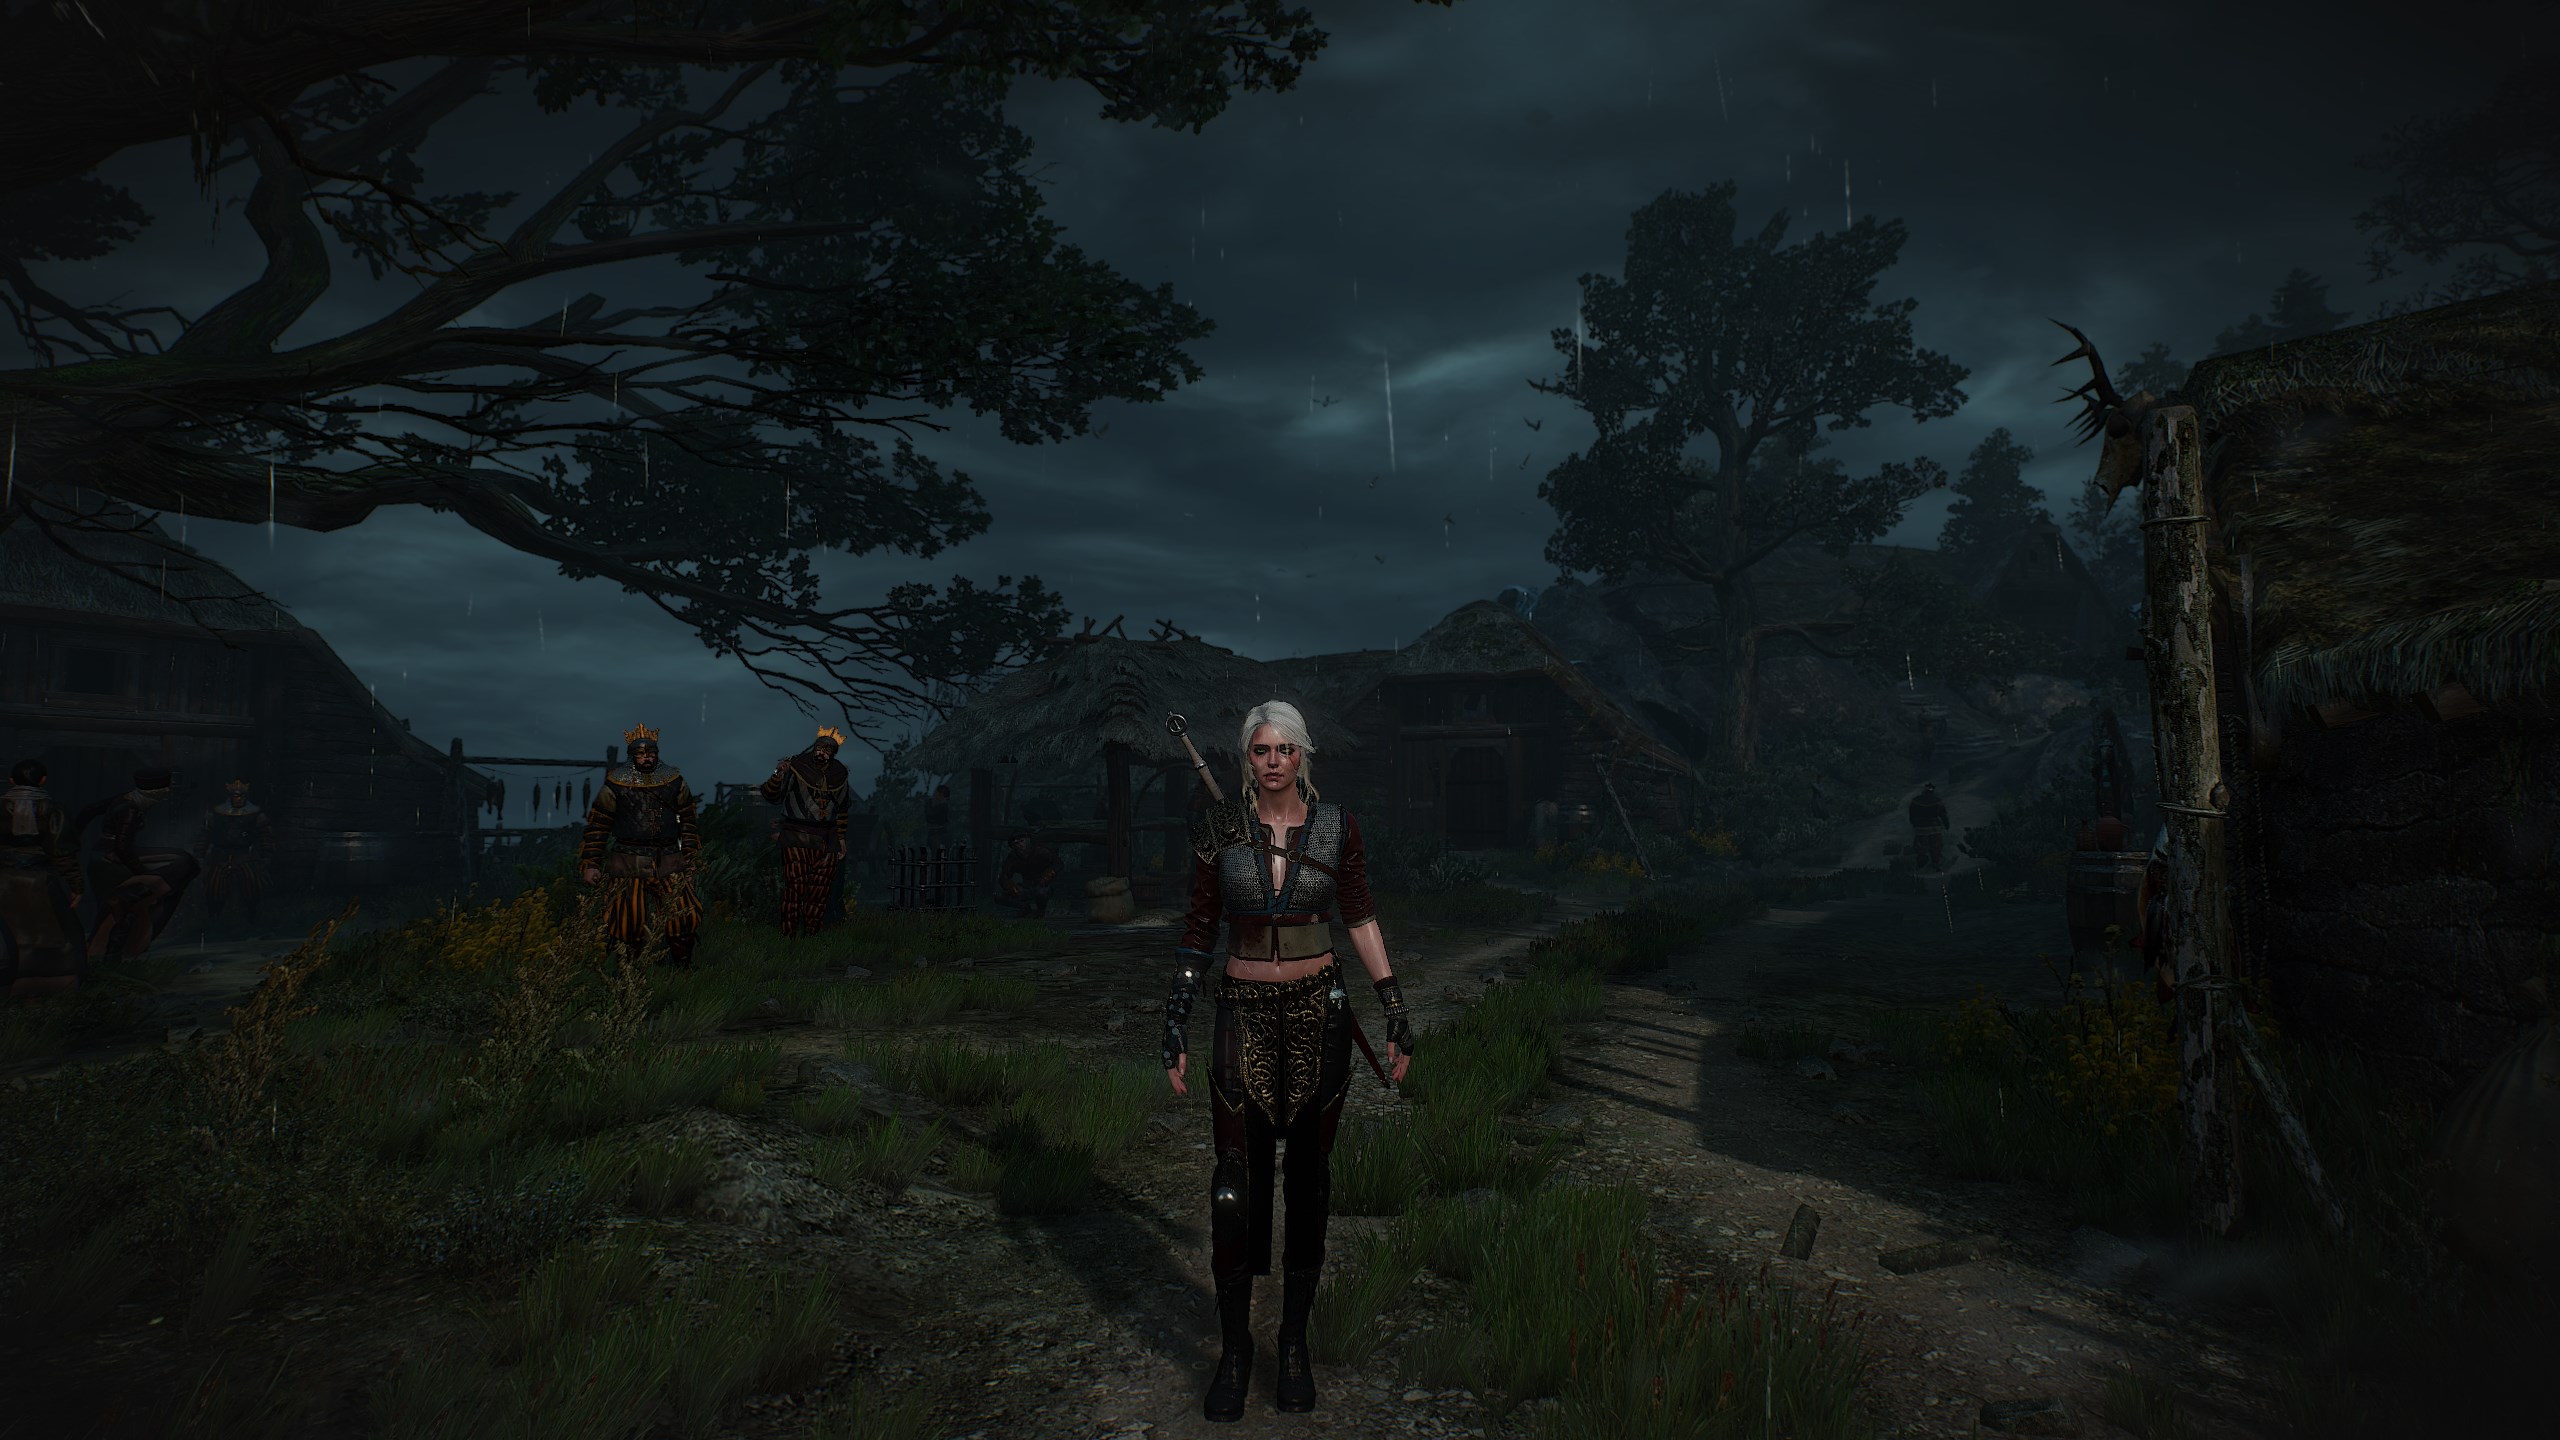 witcher 3 console commands